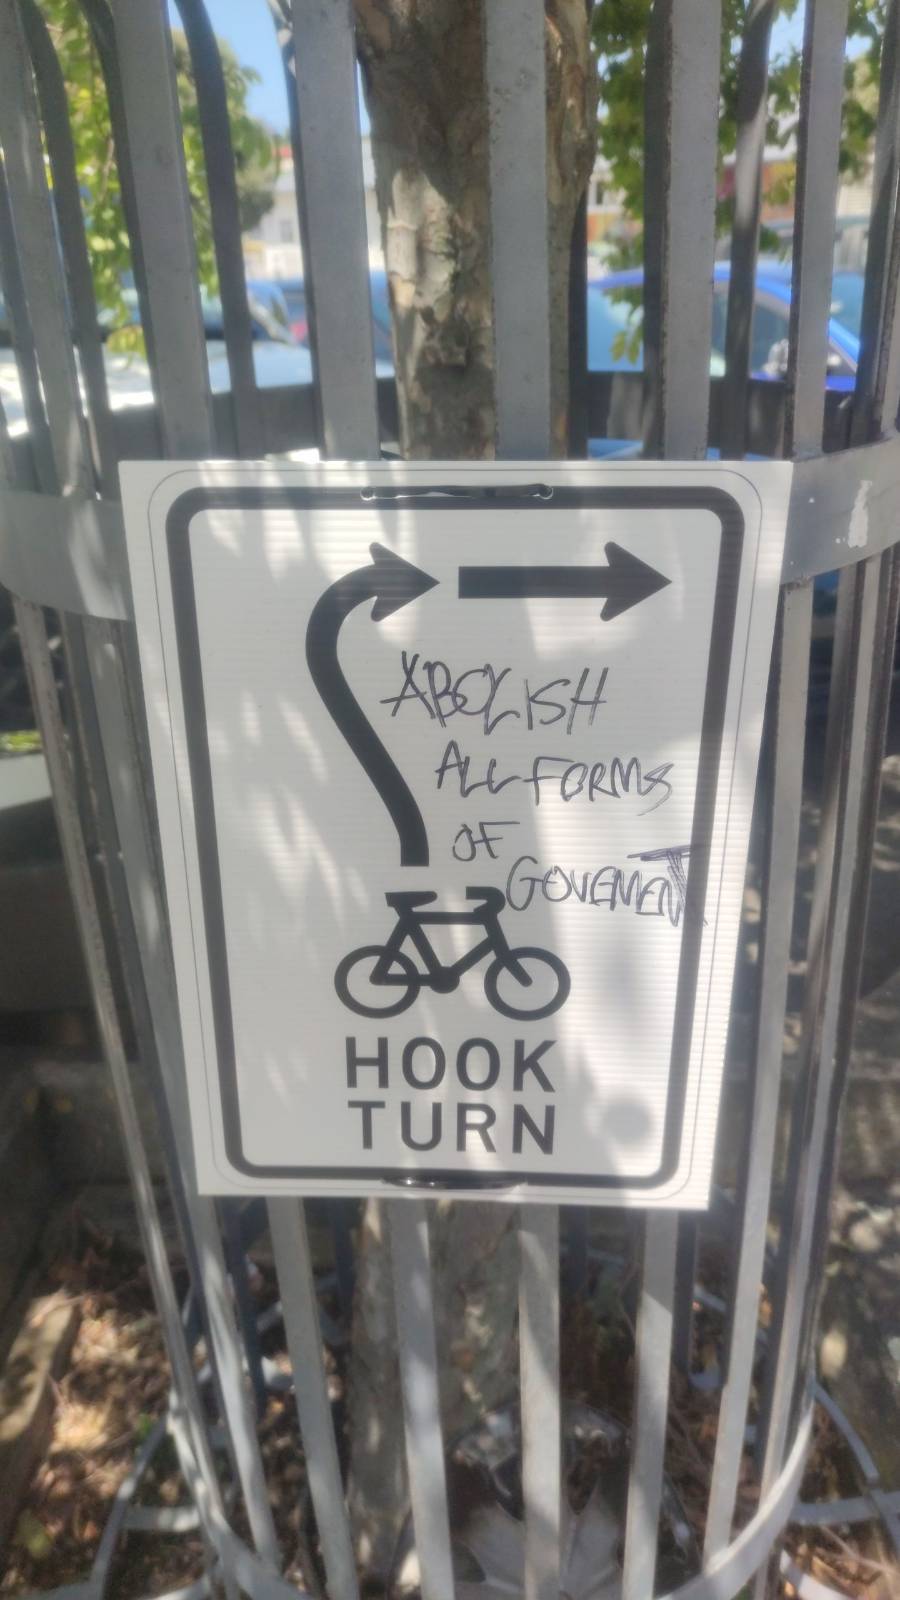 A sign for cyclists indicating to perform a hook turn with graffiti "abolish all forms of government"